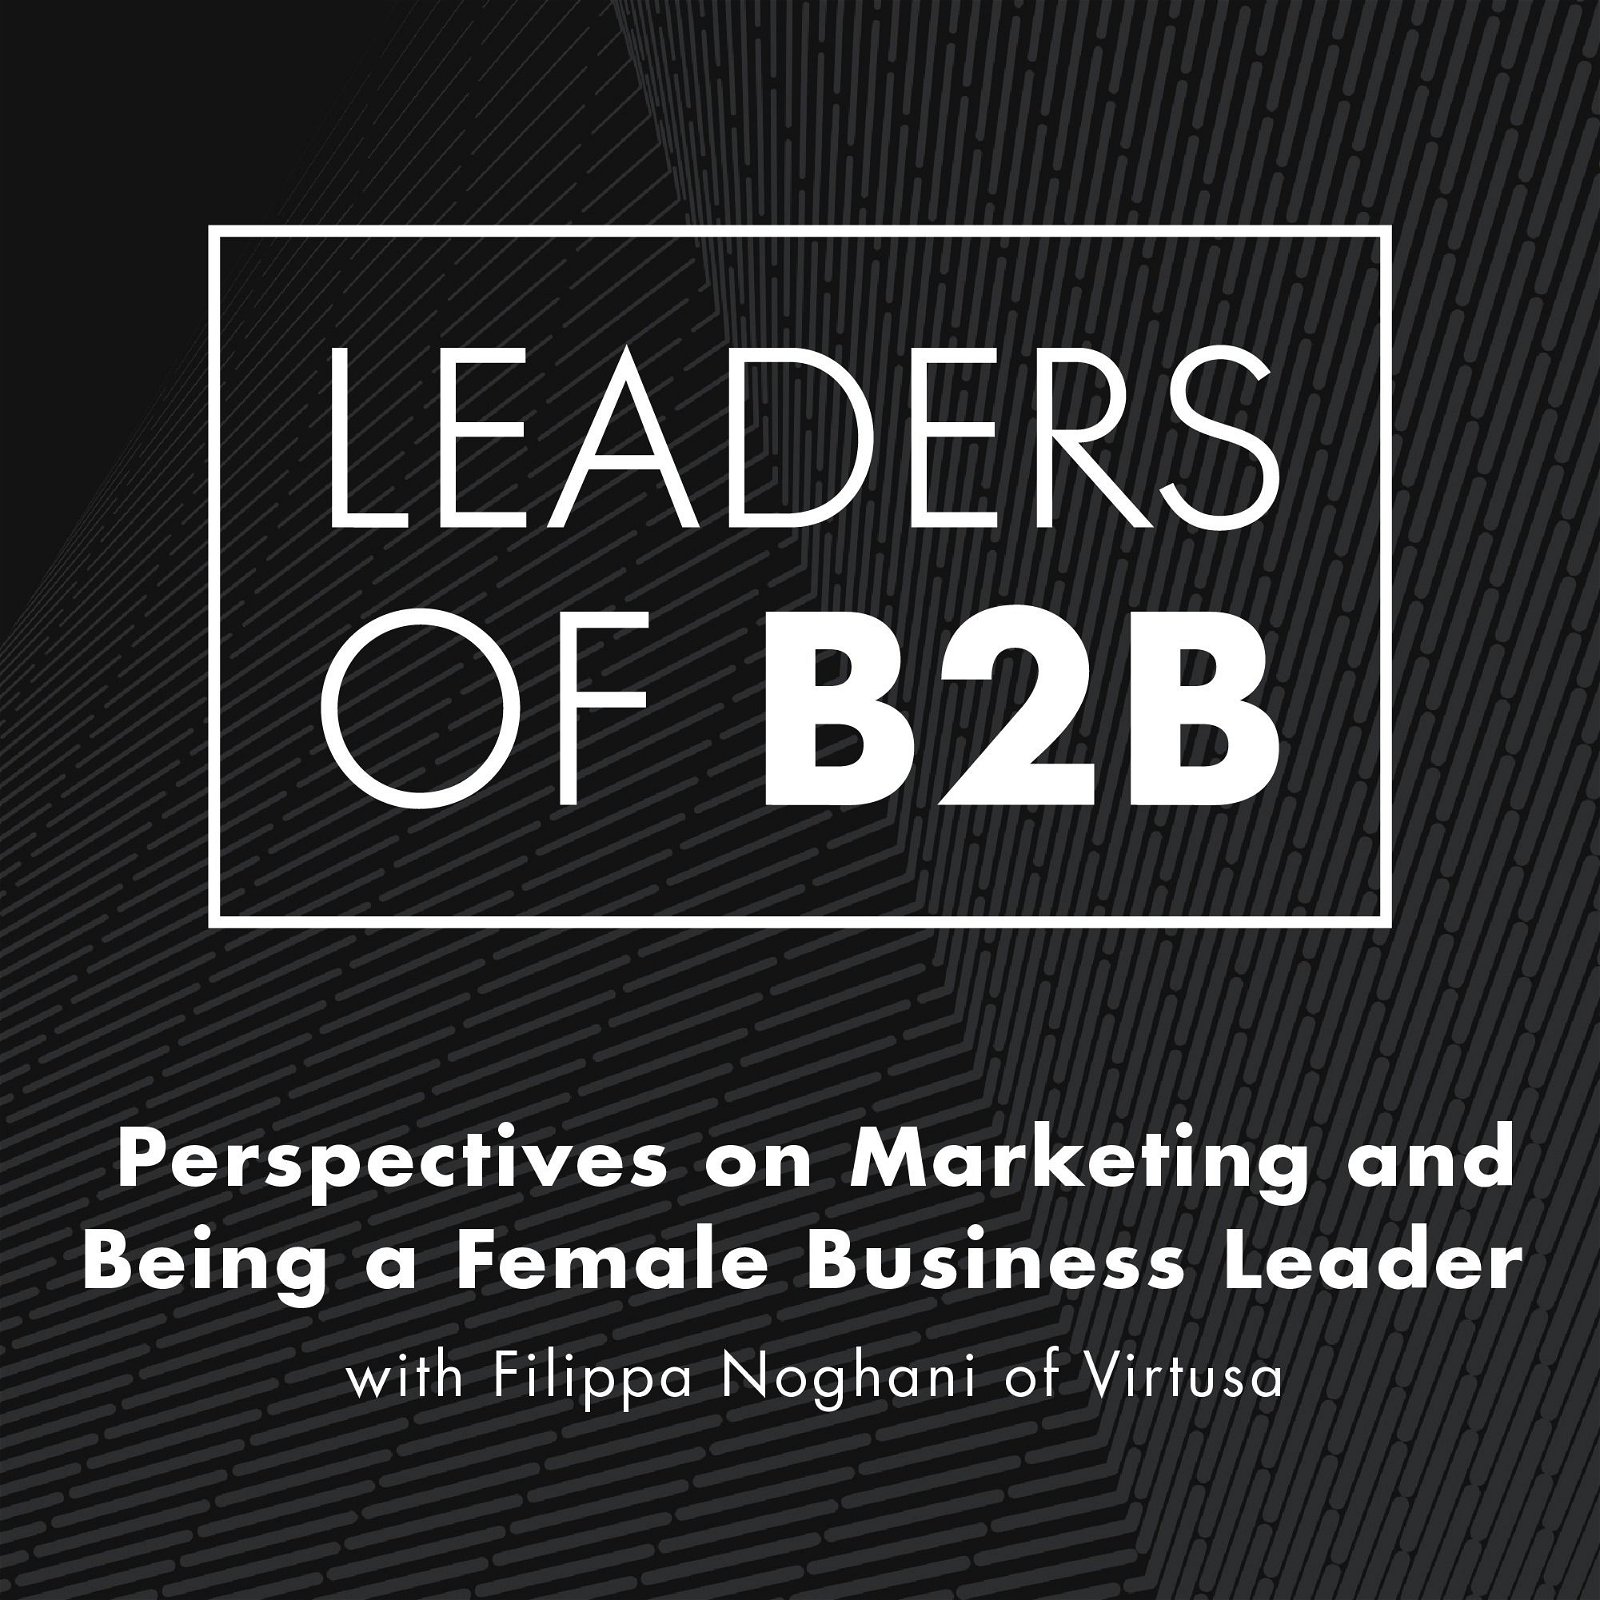 Perspectives on Marketing and Being a Female Business Leader with Filippa Noghani of Virtusa